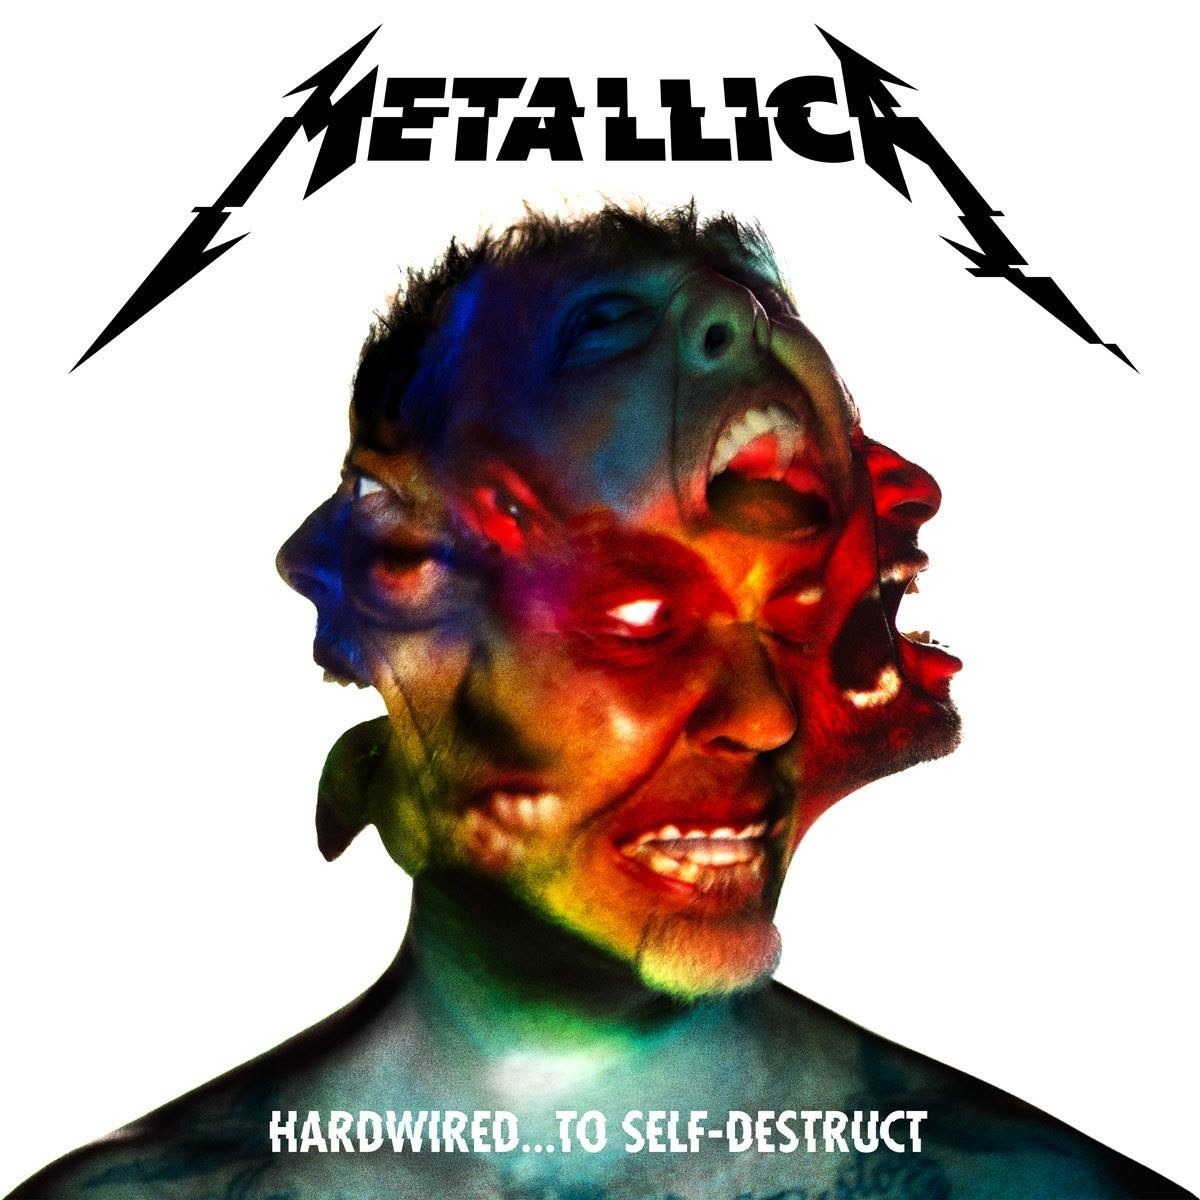 The new Metallica Album came out today! Go get it!